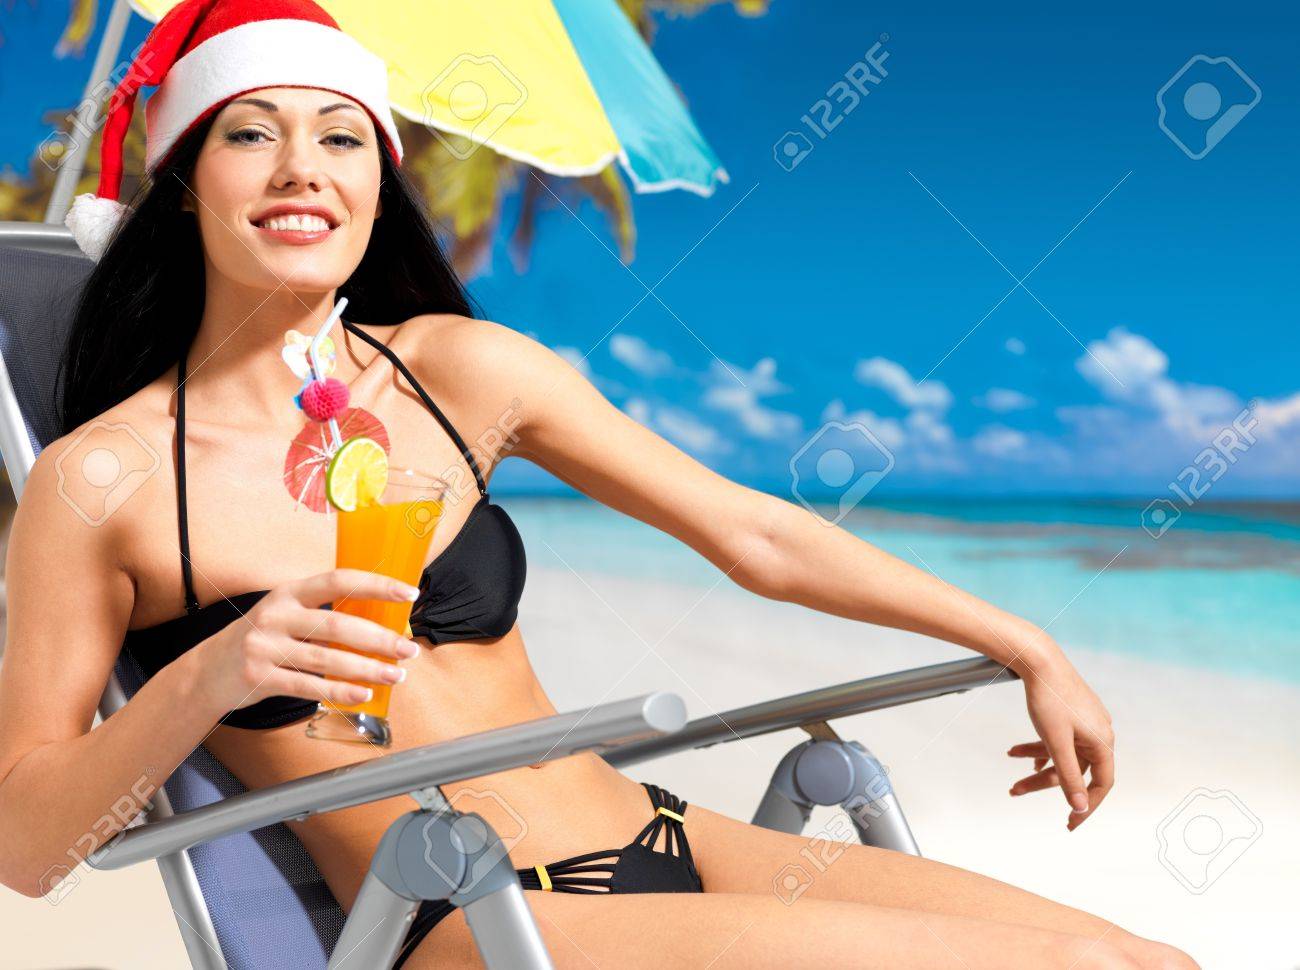 40659300-Happy-woman-celebrating-the-new-year-at-the-beach-A-beautiful-girl-in-the-santa-hat-with-a-refreshin-Stock-Photo.jpg